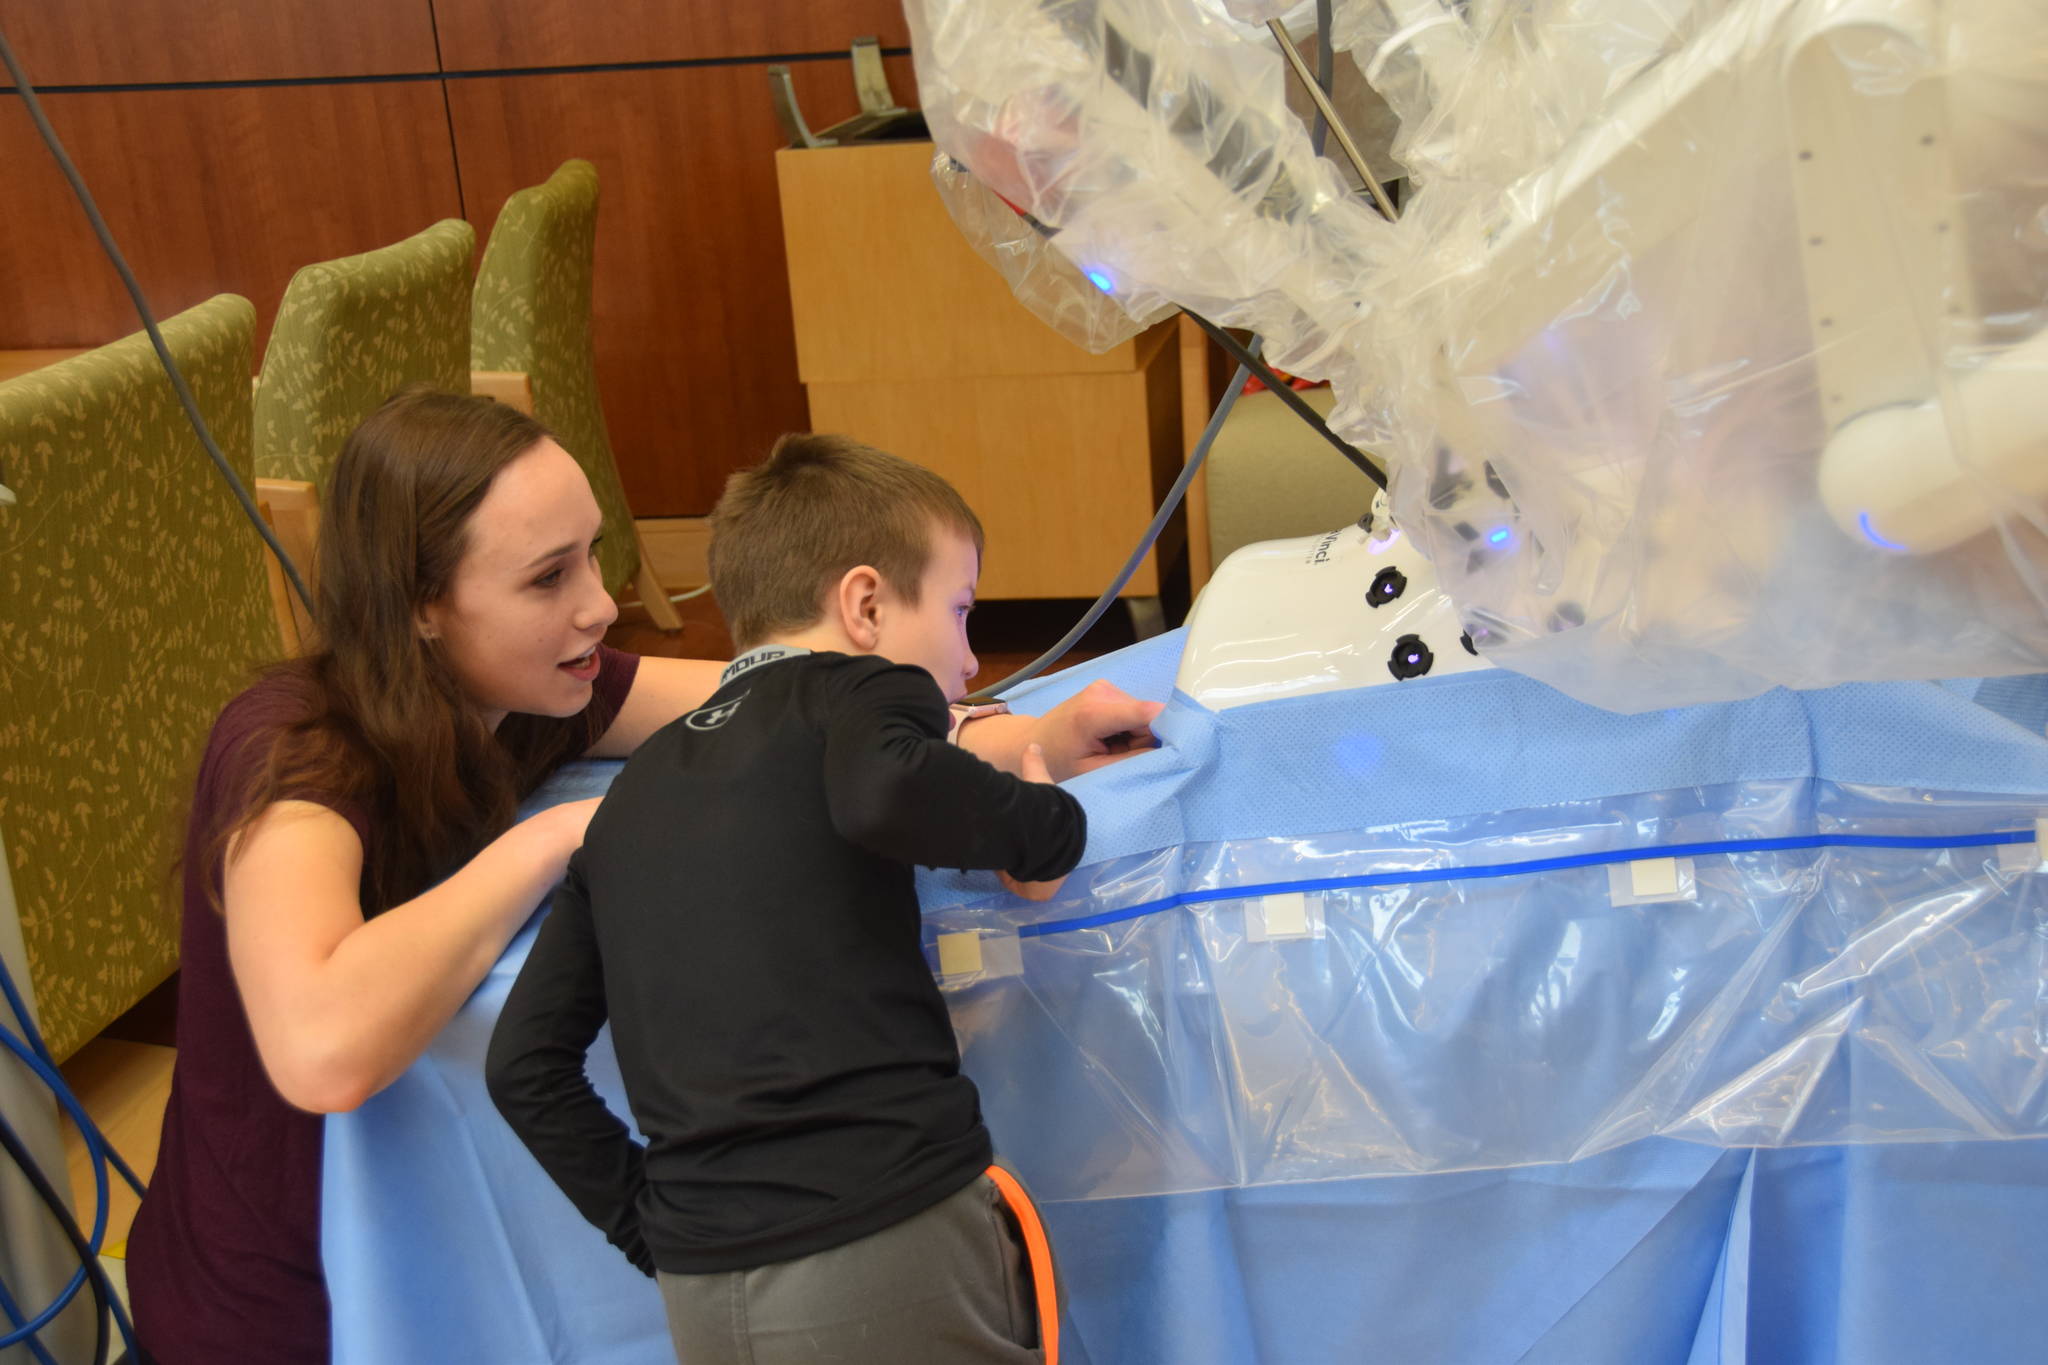 RN Sage Davenport shows a young fairgoer how the Da Vinci Xi works during the Community Health Fair at Central Peninsula Hospital in Soldotna, Alaska, on March 23, 2019. (Photo by Brian Mazurek/Peninsula Clarion)